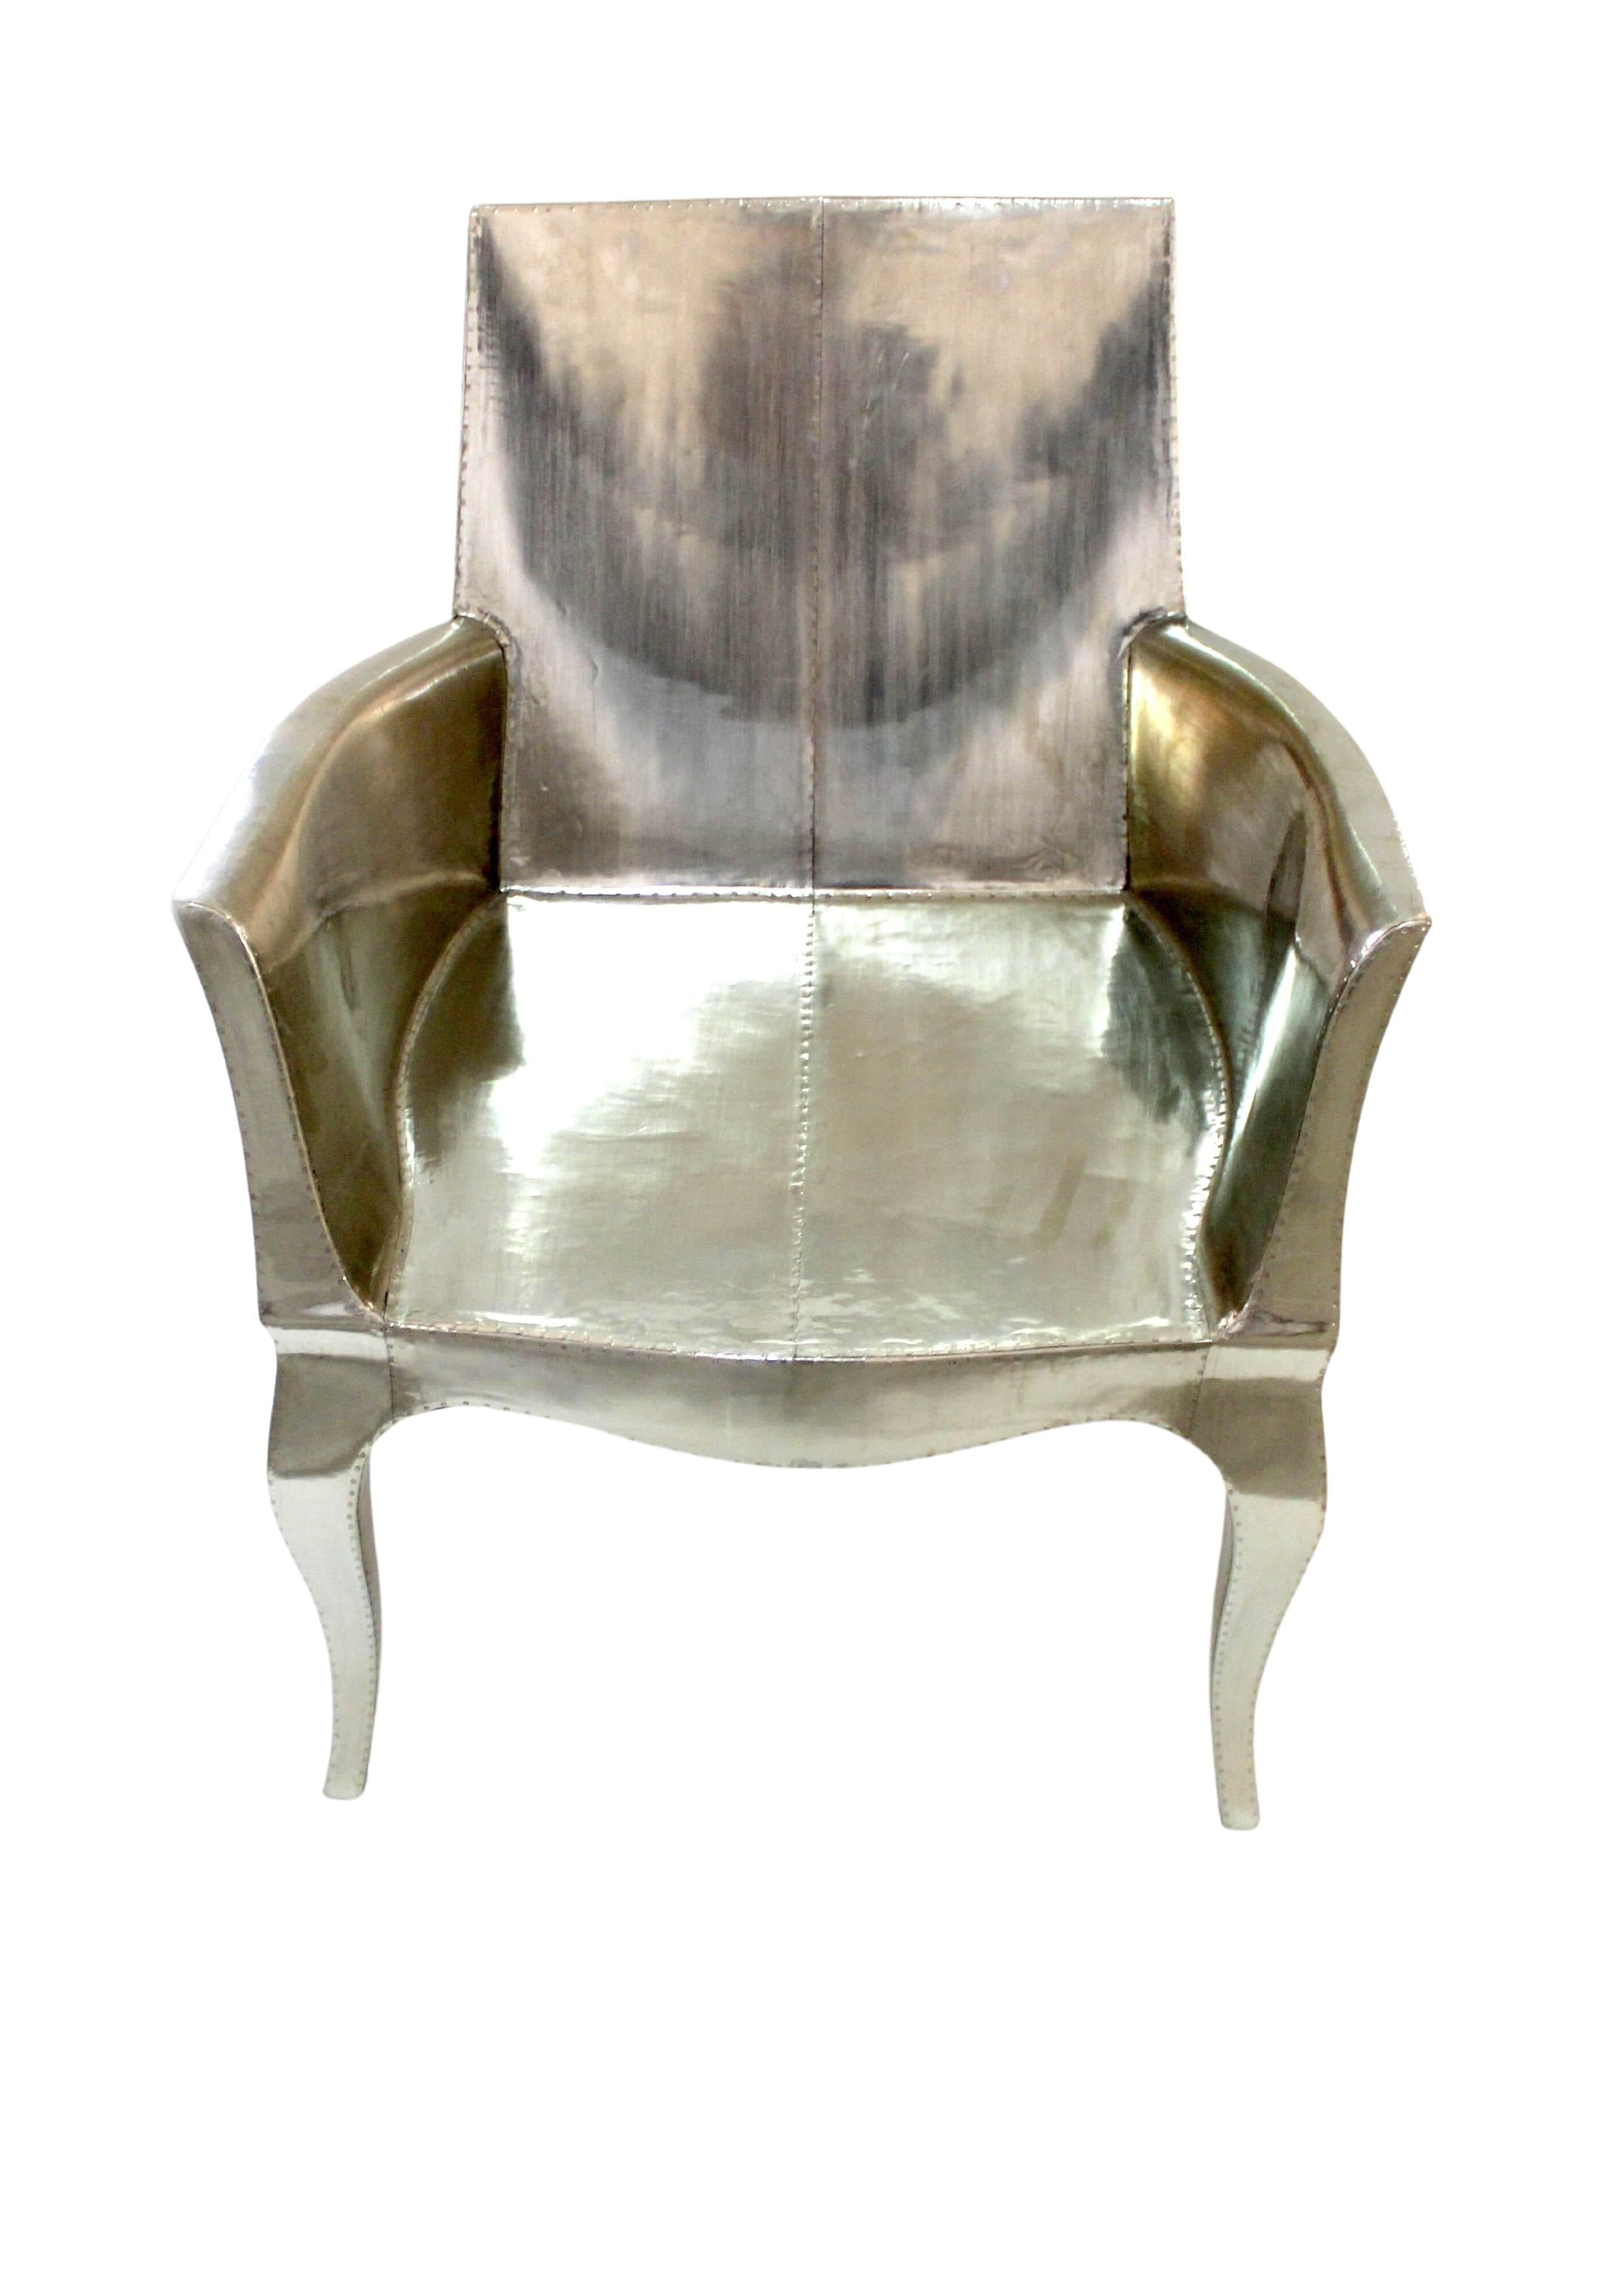 Bronzed Art Nouveau Dining Chairs Pair Designed by Paul Mathieu for Stephanie Odegard For Sale